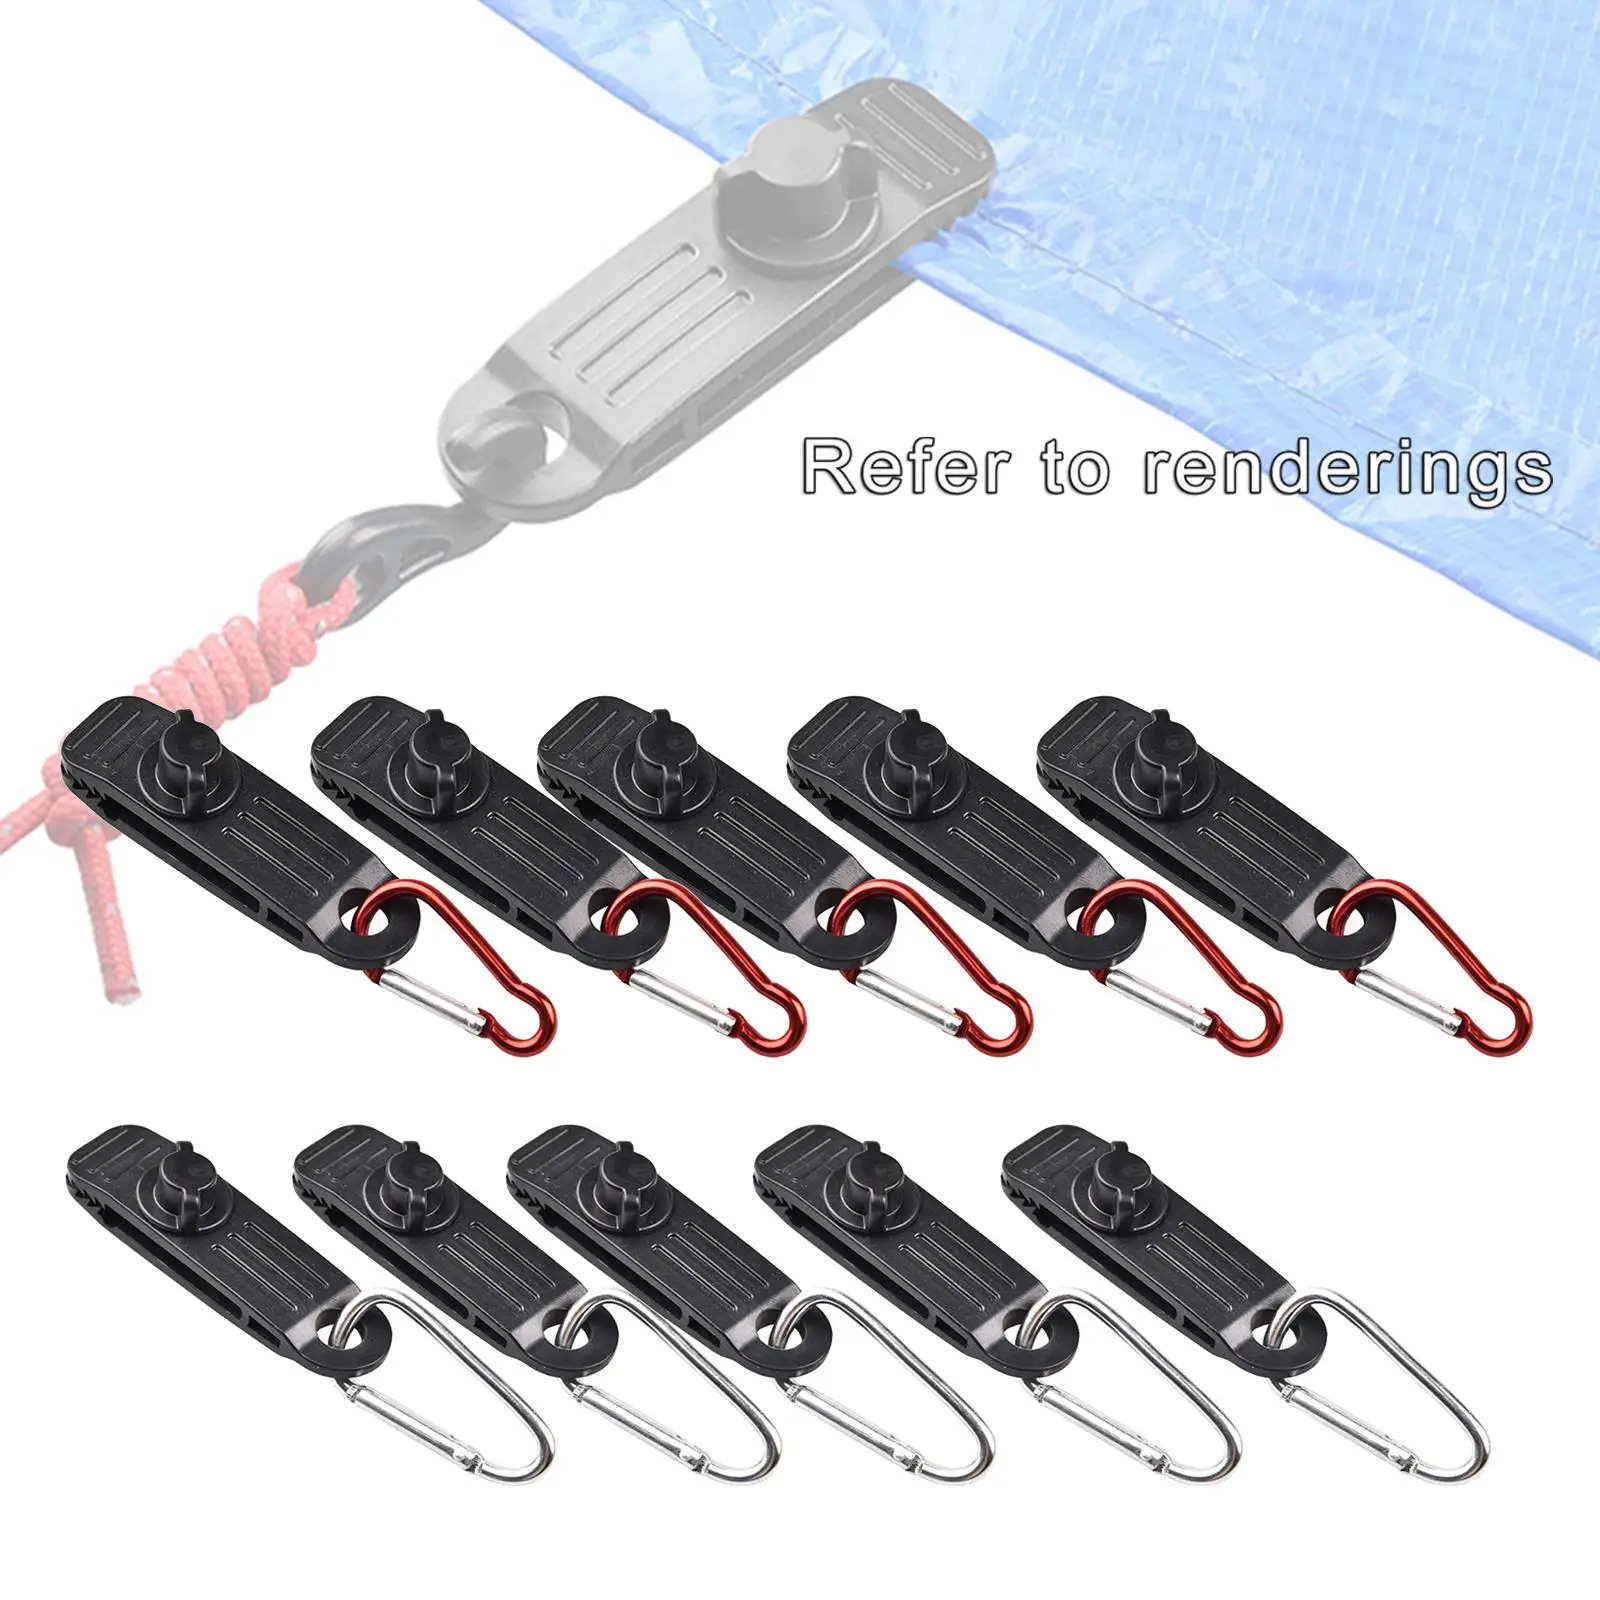 10x Heavy Duty Tent Snap Clamp Tighten Canopy Fasteners handle type lock with Buckles Te Clip